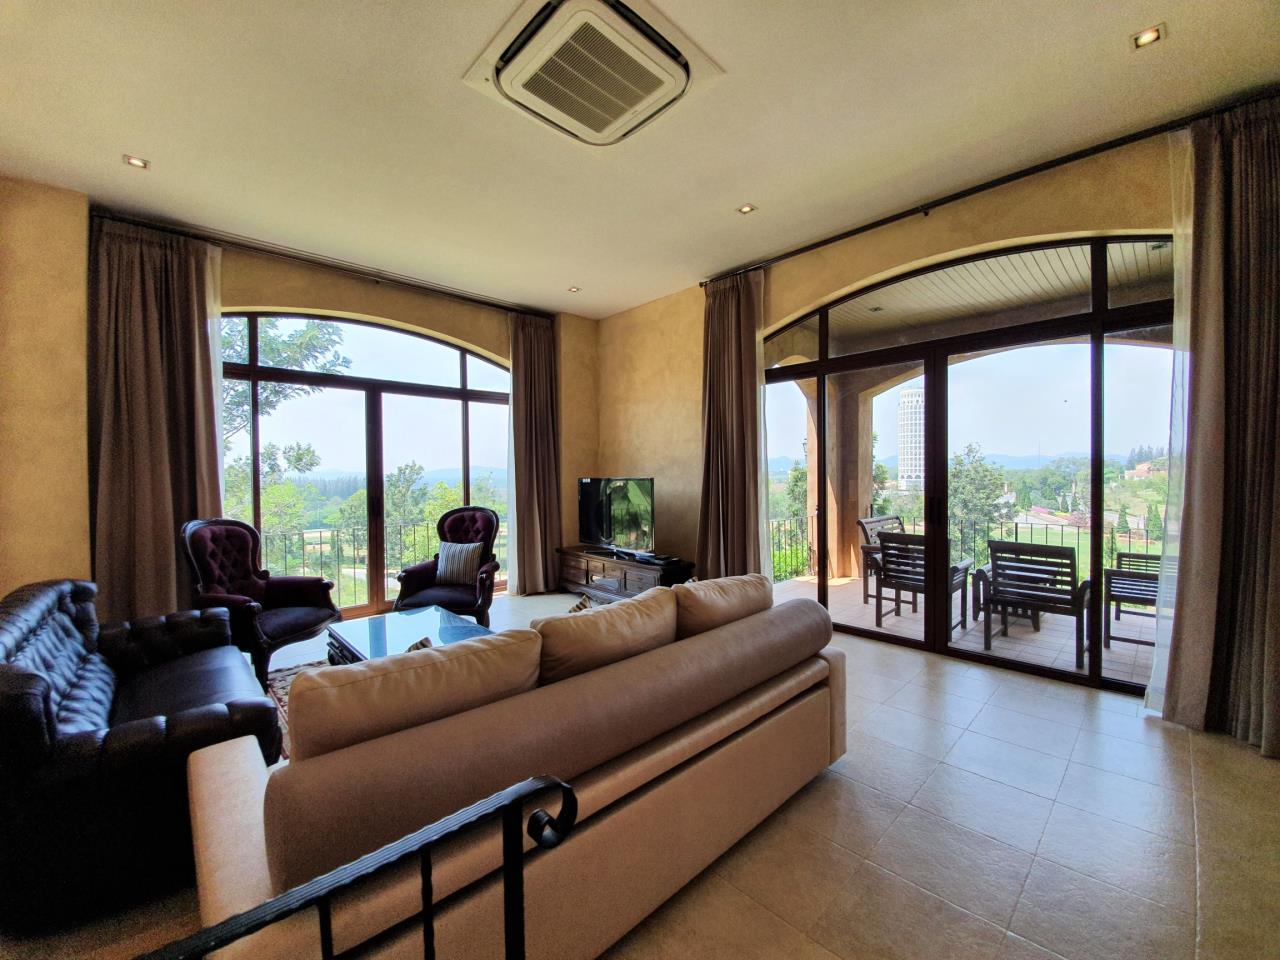 4 Bedrooms 4 Bathrooms Size 633sqm The Valley Khaoyai For Sale 70000000, ภาพที่ 4